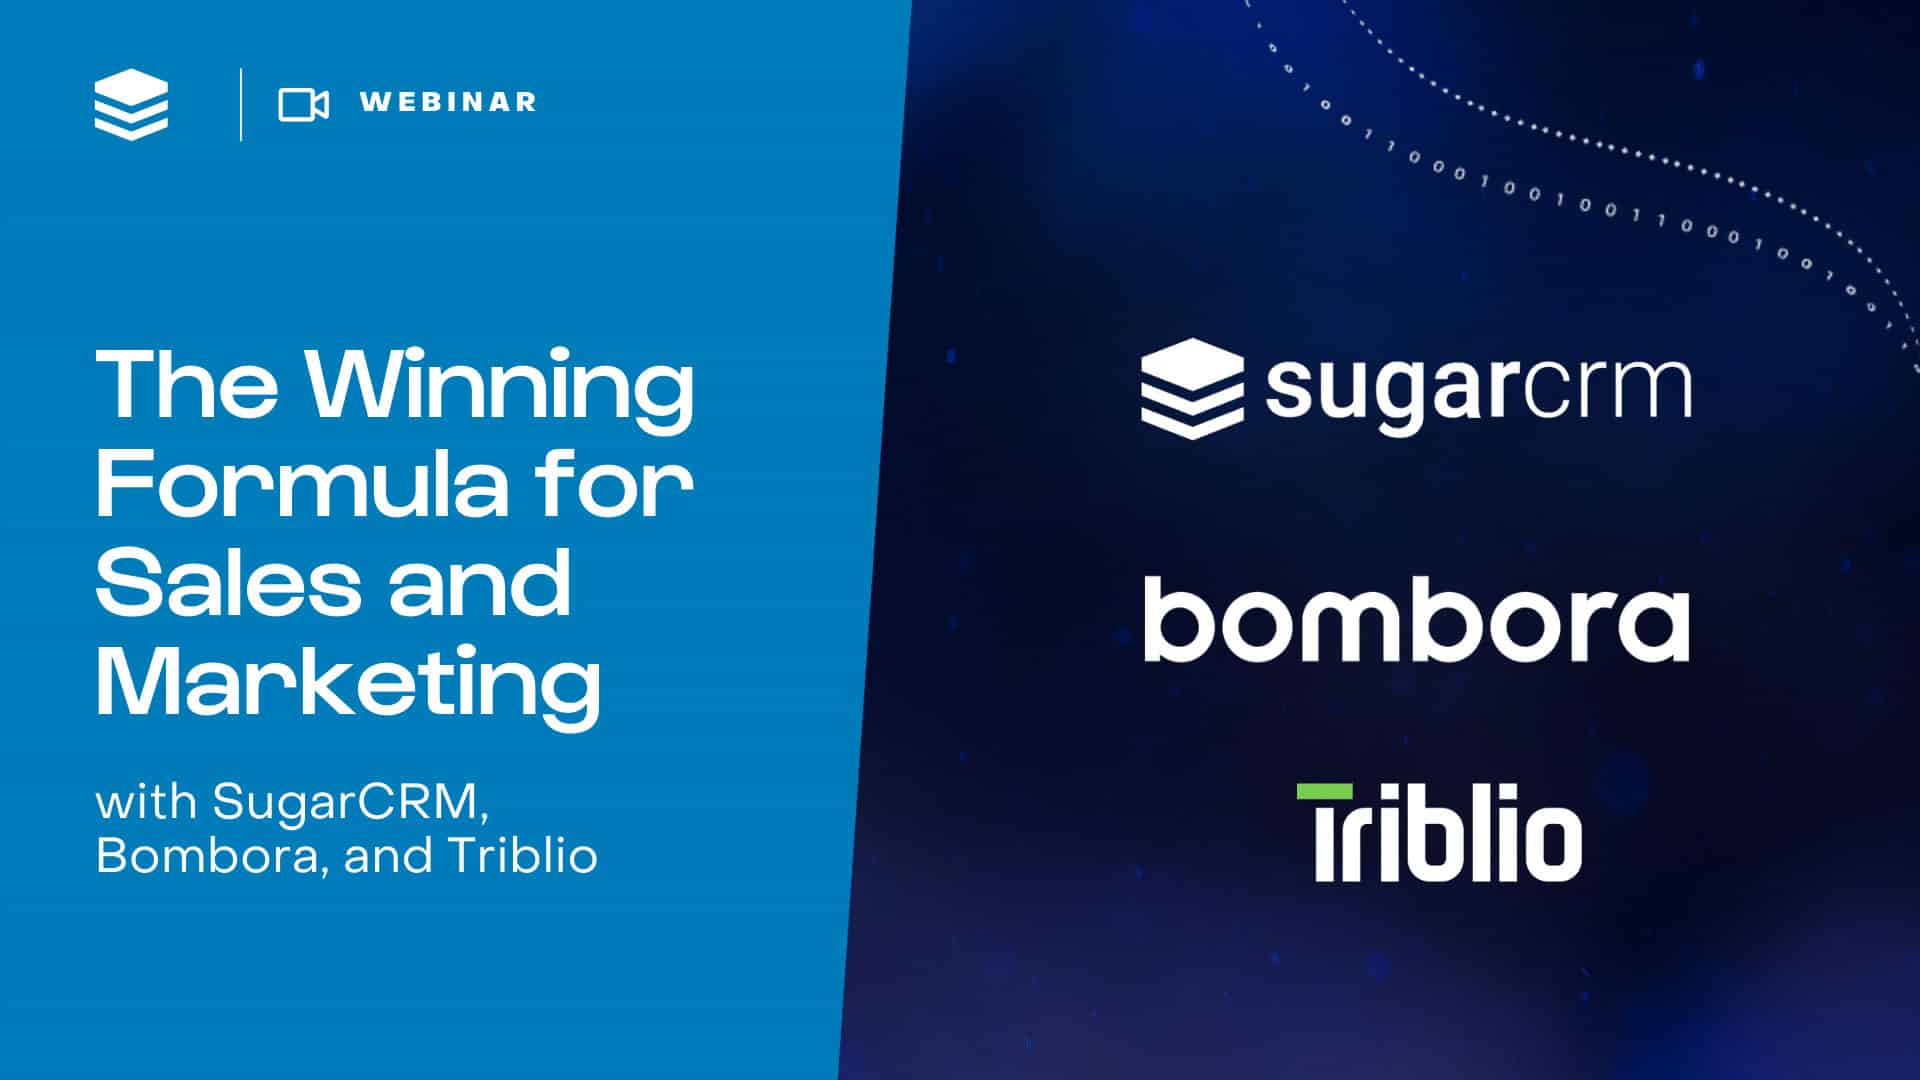 Achieve Sales and Marketing Success with Bombora and Triblio